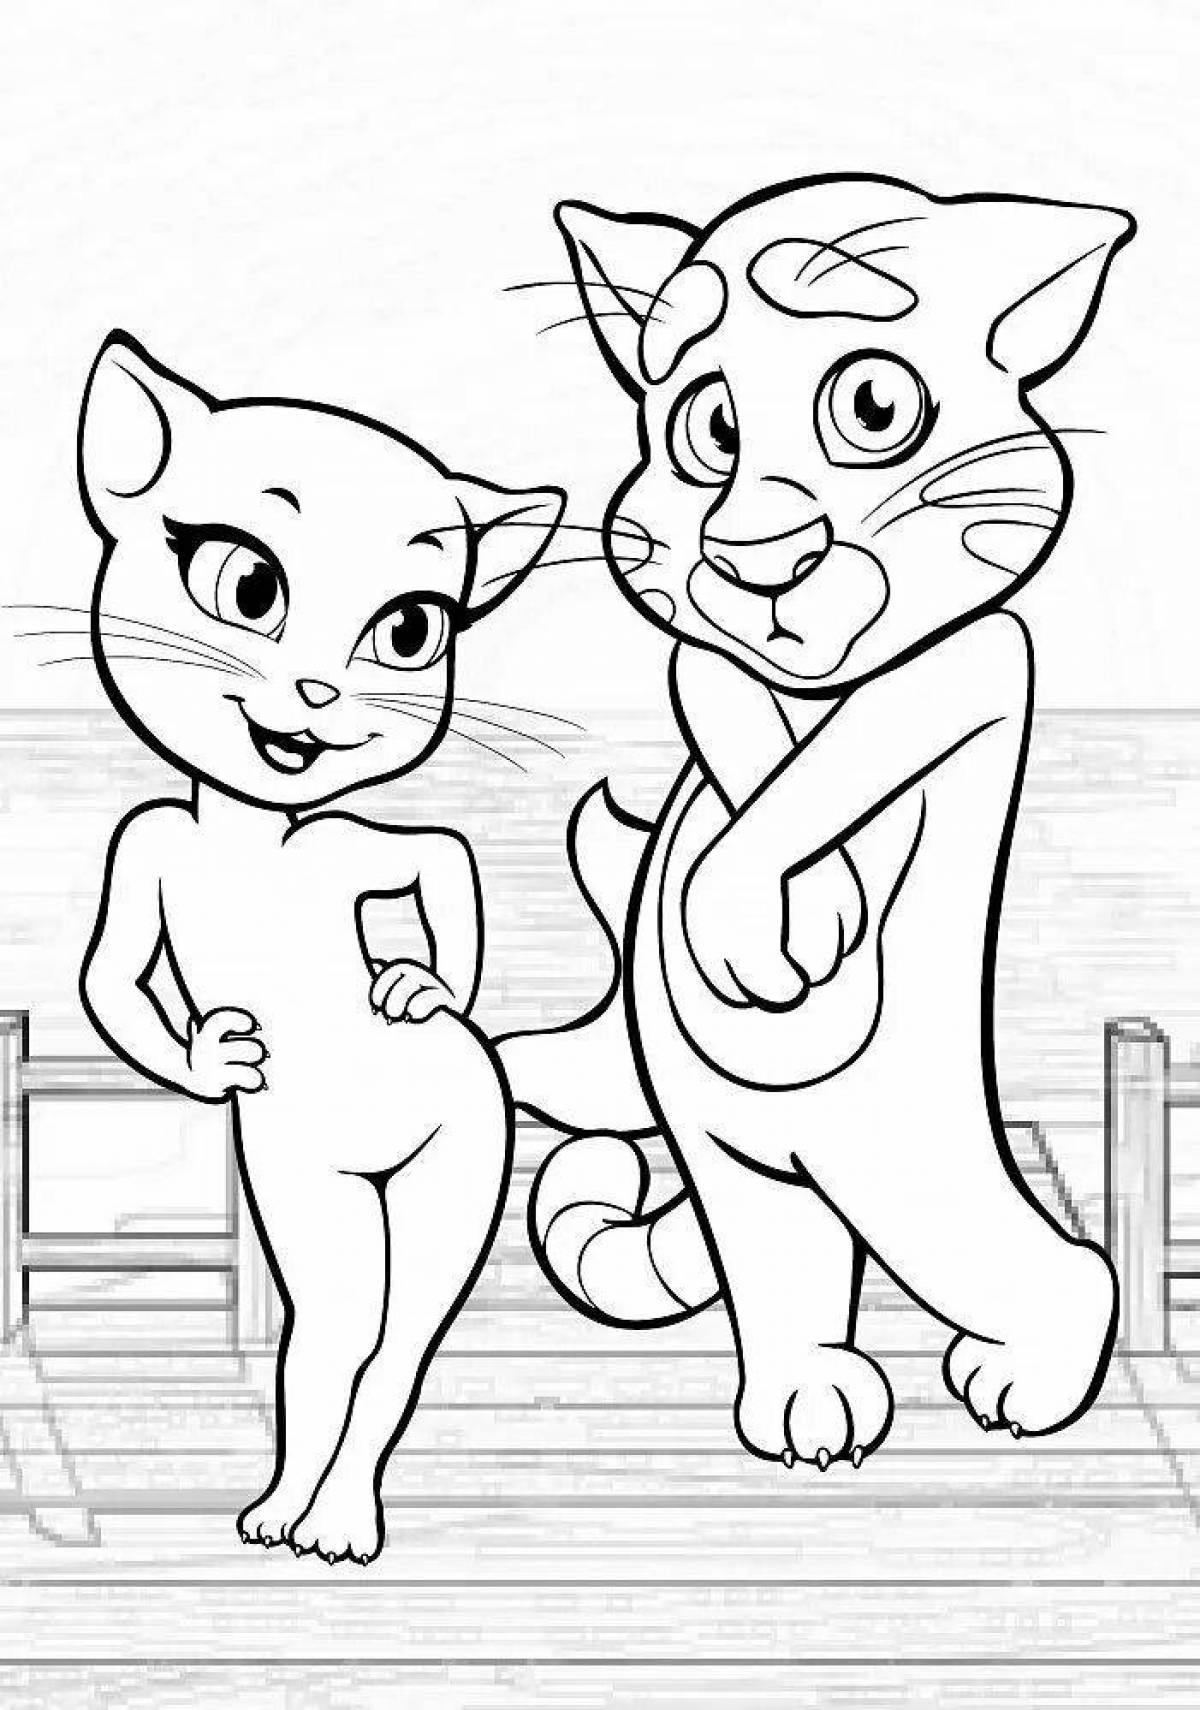 Intensive coloring page volume